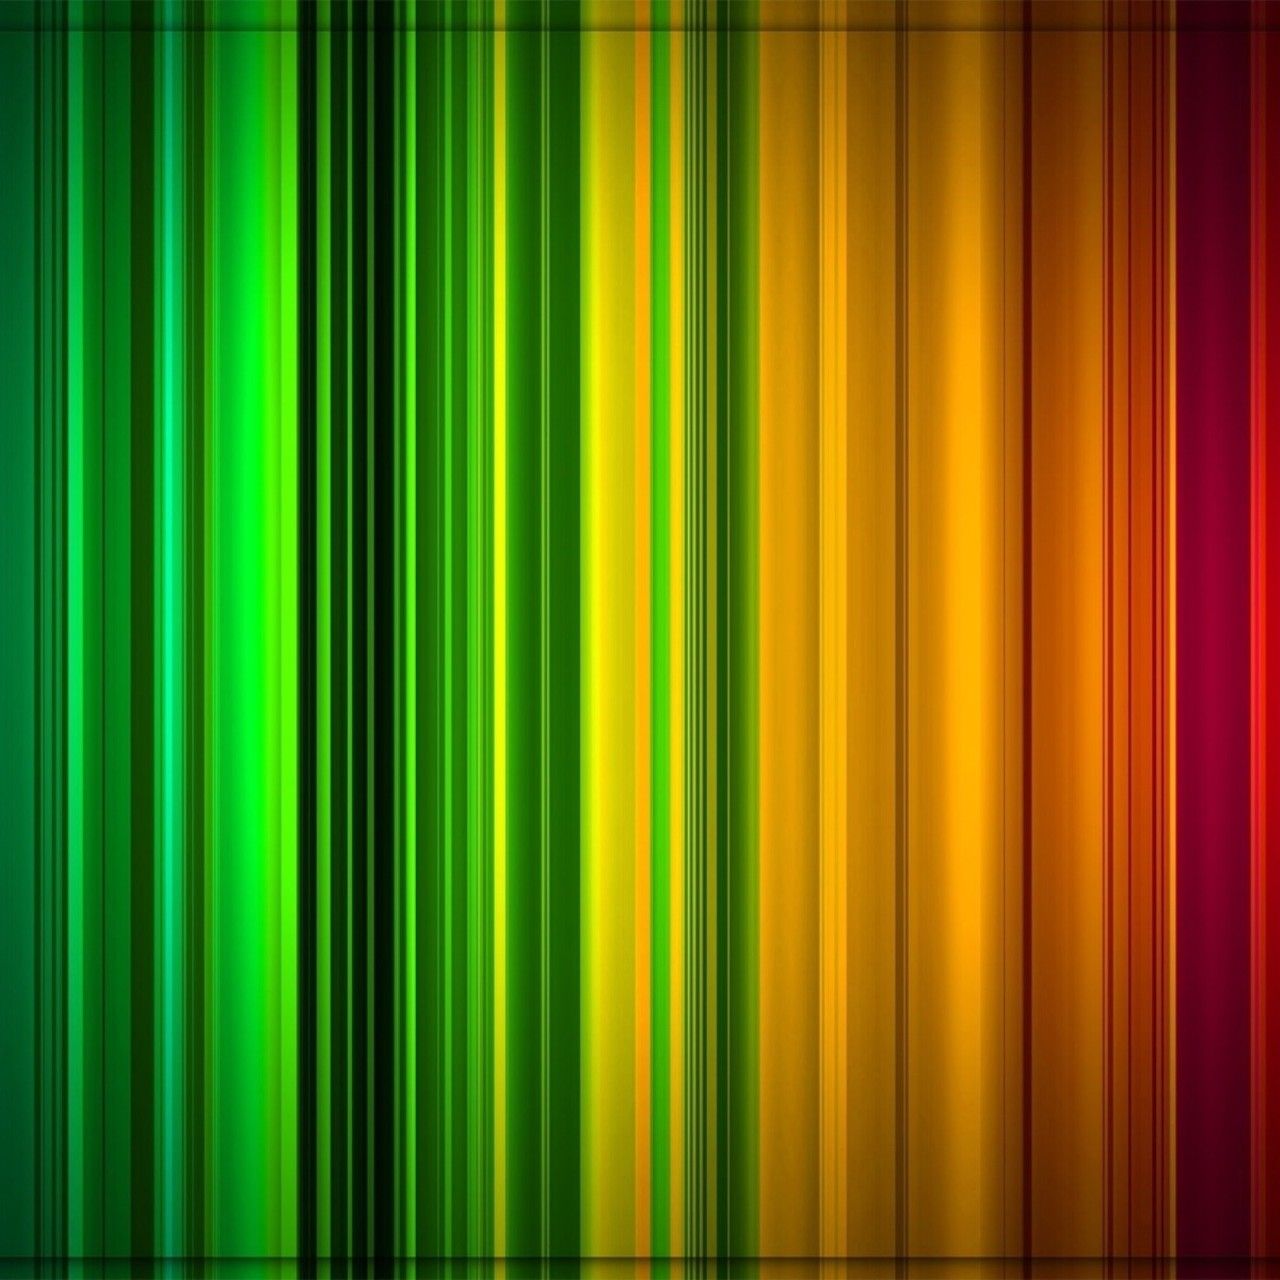 Colorful Stripes Abstract Wallpaper HD Wallpaper Free